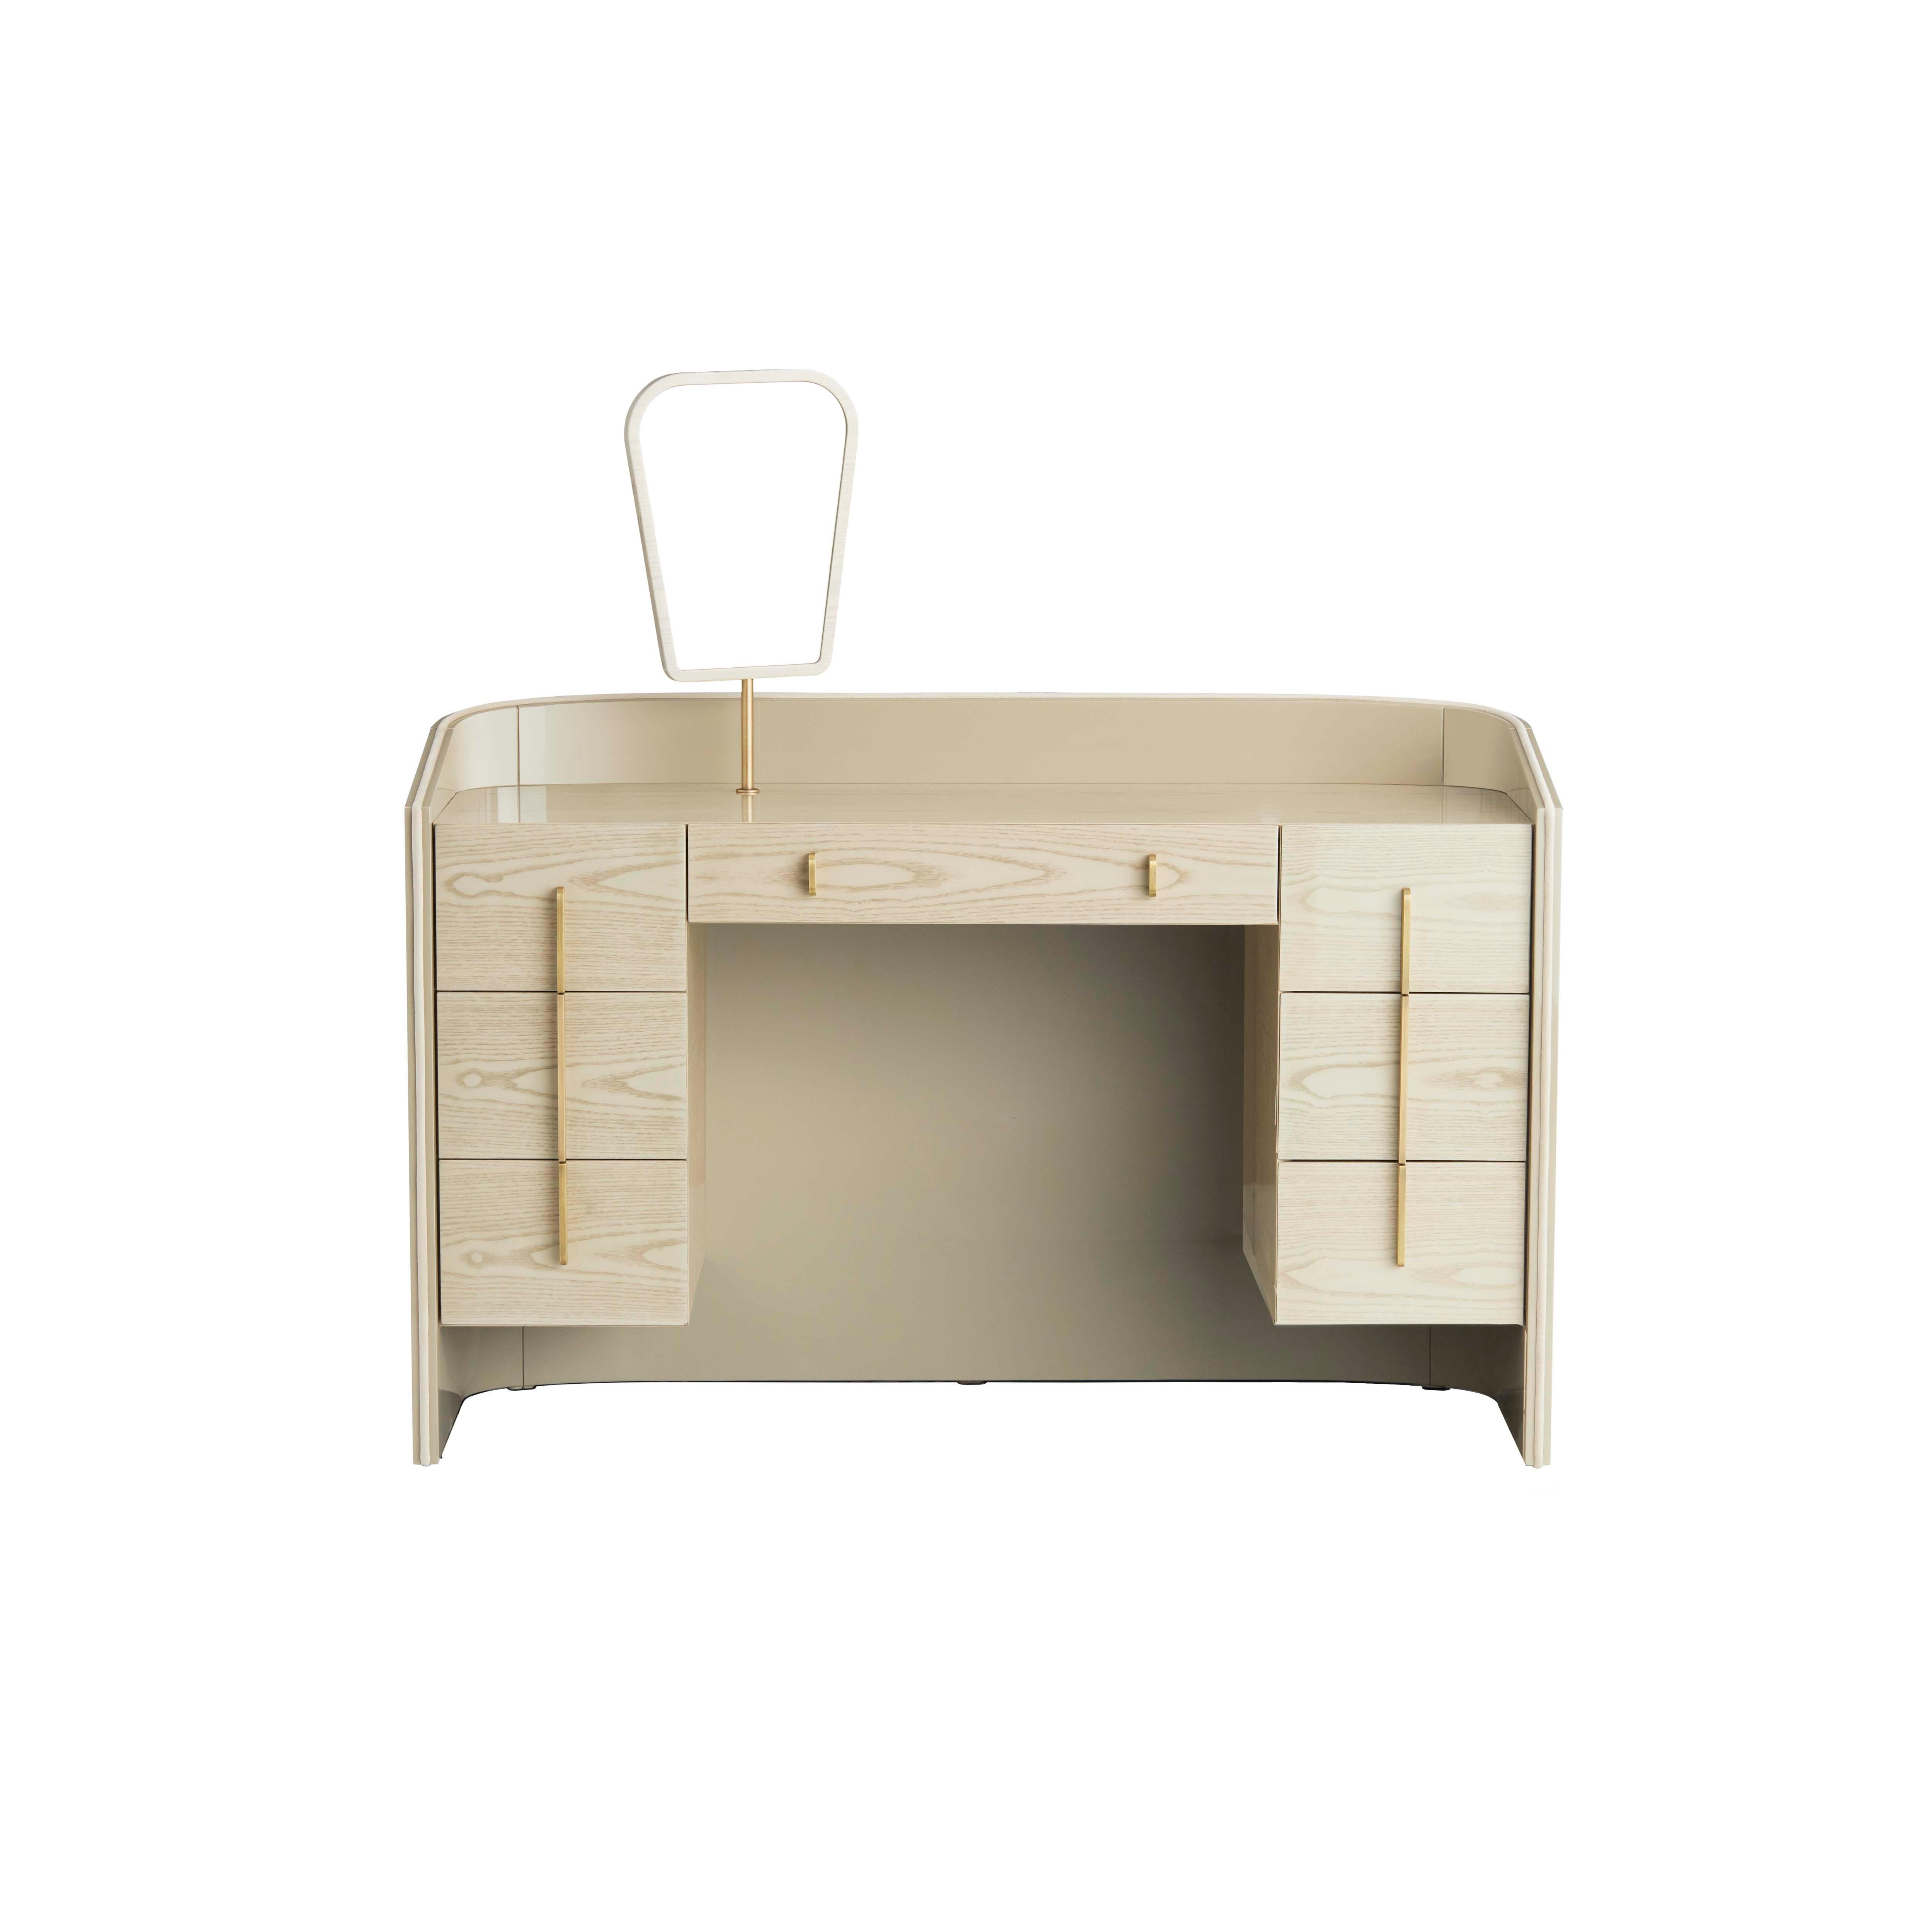 Designed to fit the bedrooms in a modern style, the CORALINA dressing table is an elegant piece, made of wood and rich in special details such as the mirror or the handles in antique brass or stainless steel.‎

Shown in glossy lacquered structure in